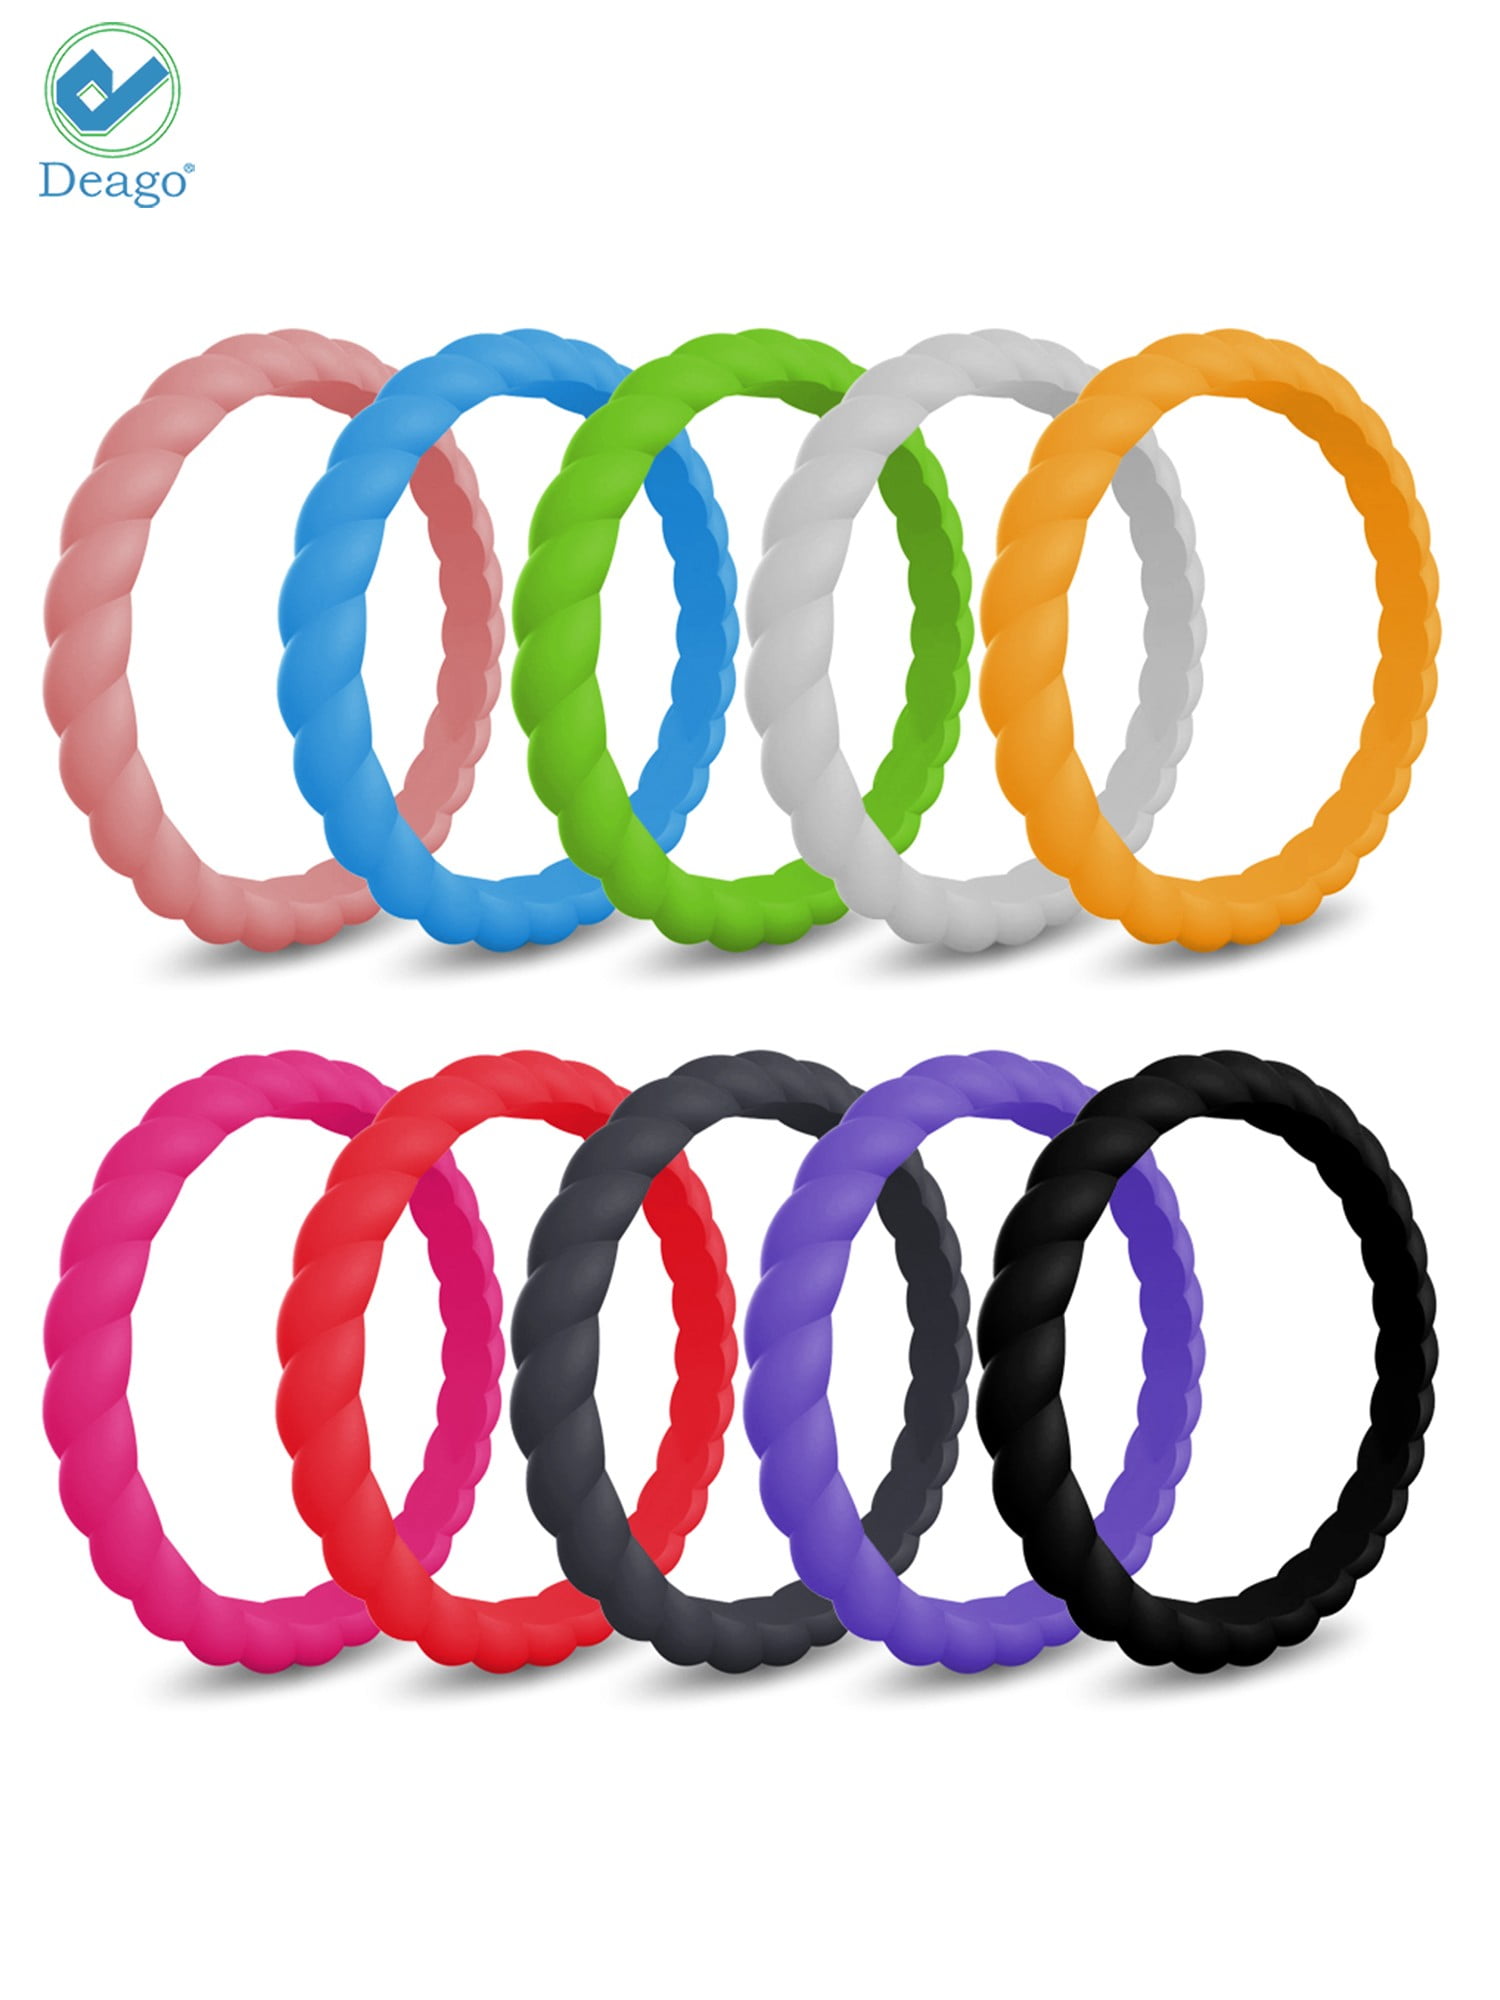 Skin Safe Colorful Fashion Forthee 10 Pack Silicone Wedding Ring for Women Thin and Braided Rubber Band Comfortable fit